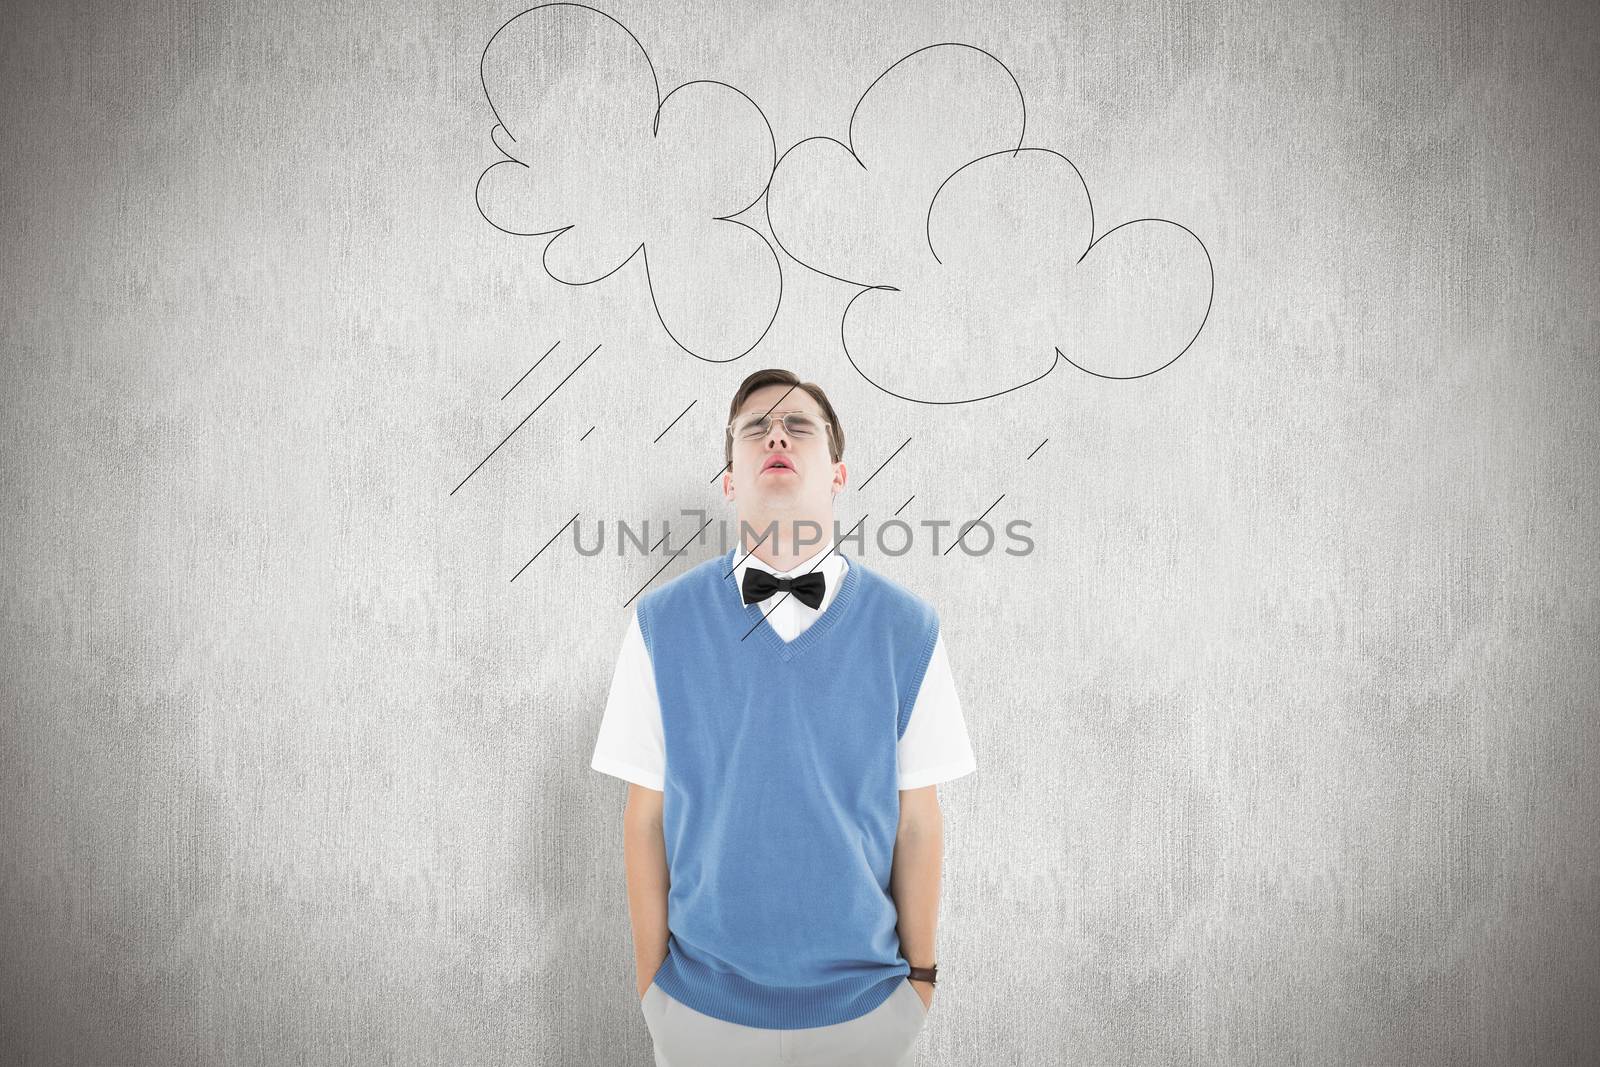 Geeky hipster looking up sadly against white background